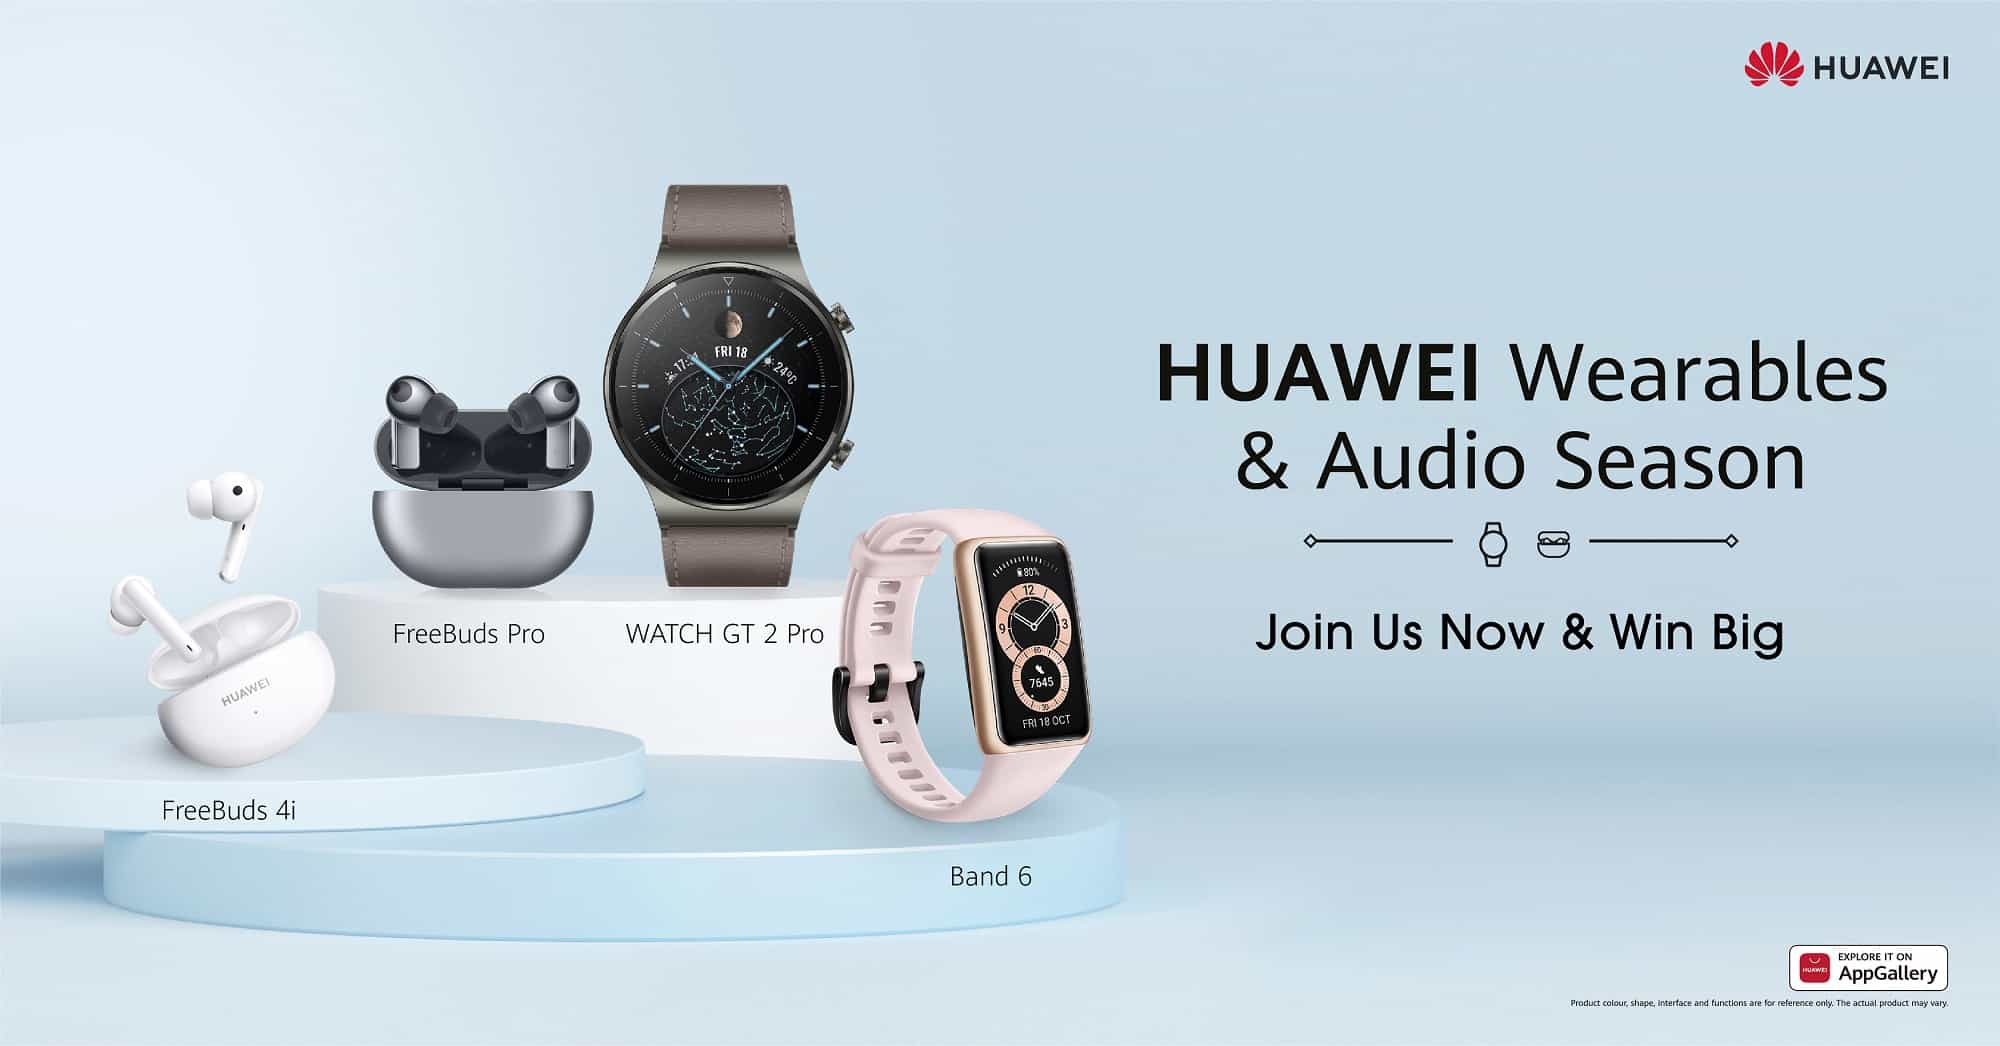 Huawei launches unique competitions to kick off its audio and wearable season